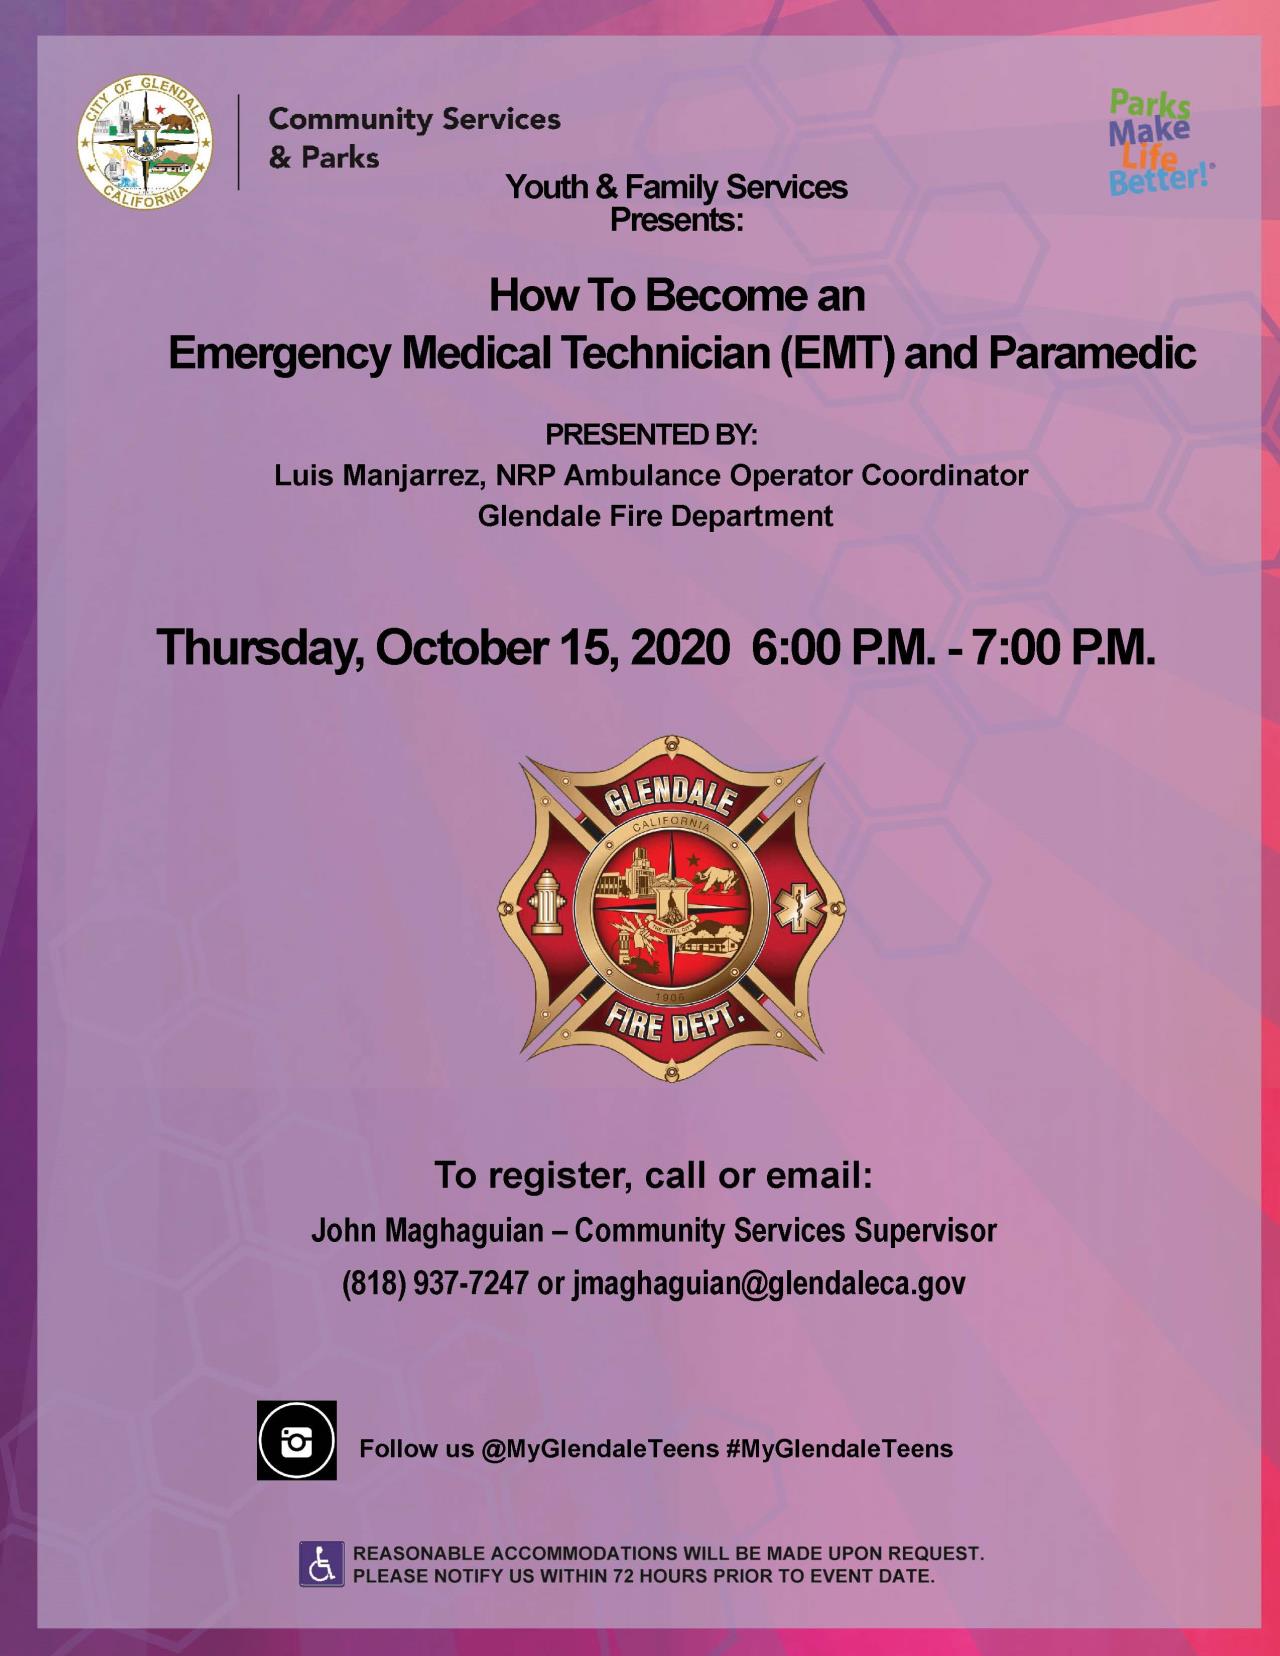 Virtual Teen Night Out Presents How to Become an Emergency Medical Technician (EMT) and Paramedic